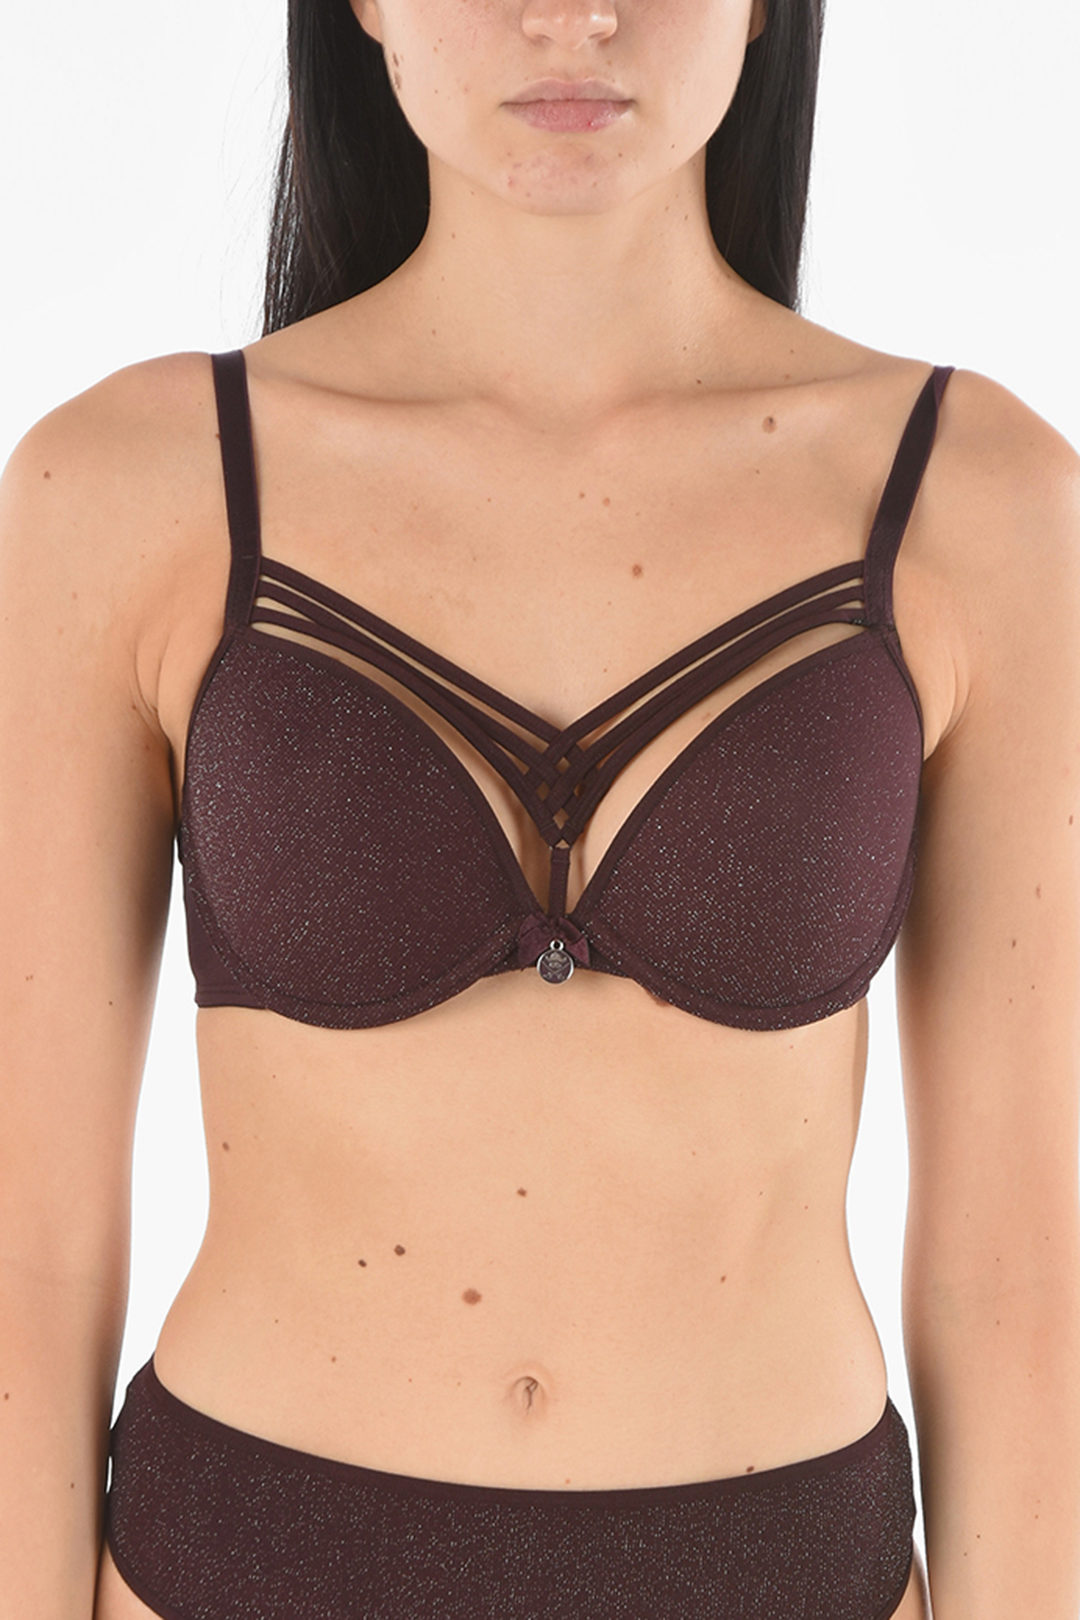 Marlies Dekkers Bra with Cut Out Details women - Glamood Outlet